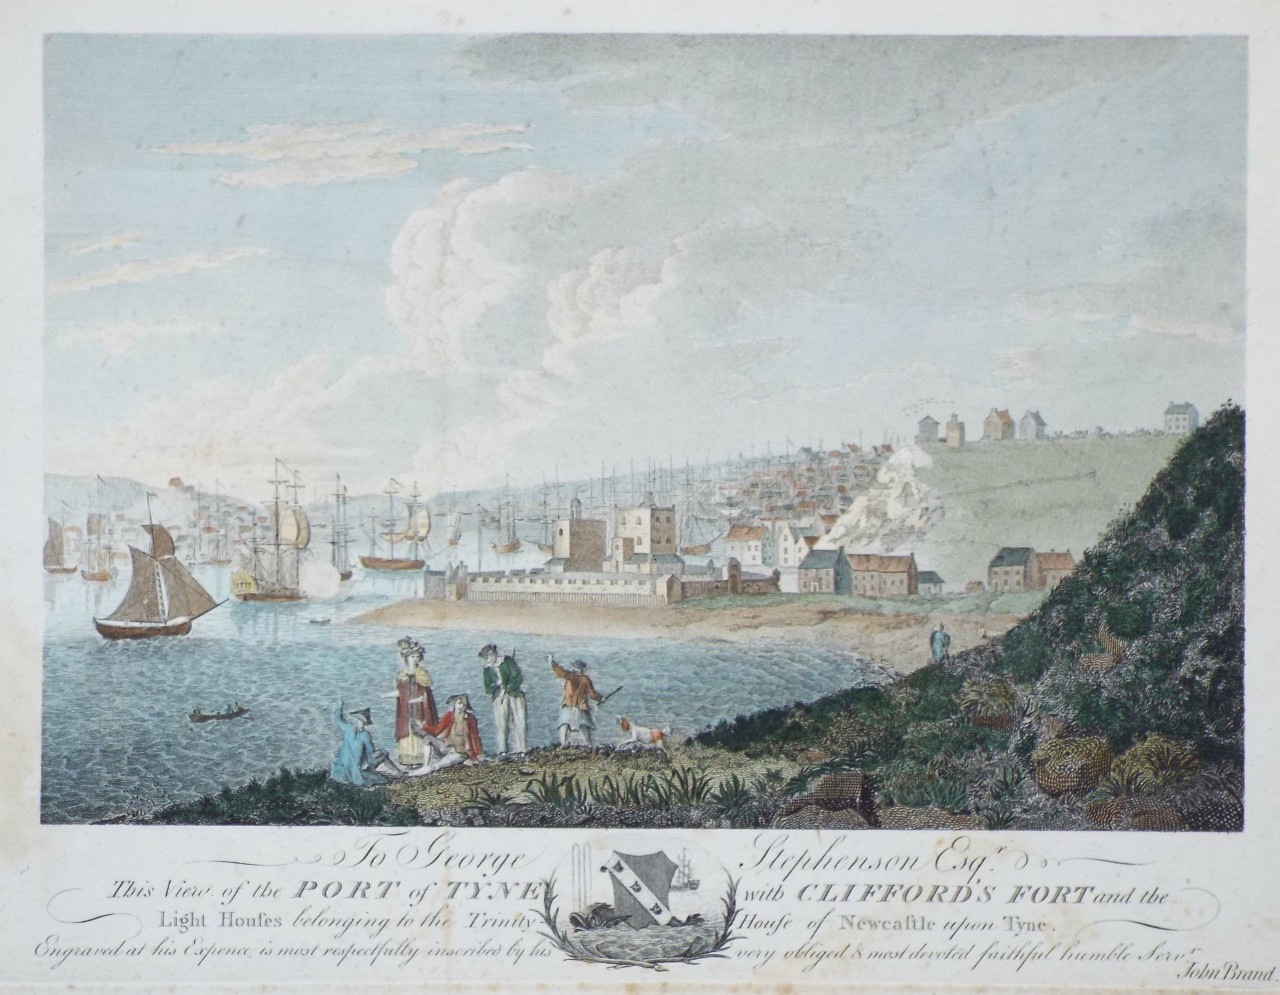 Print - To George Stephenson Esqr. This View of the Port of Tyne with Clifford's Fort and the Light Houses belonging to the Trinity House of Newcastle upon Tyne. Engraved at his Expense is most respectfully inscribed by ... John Brand.